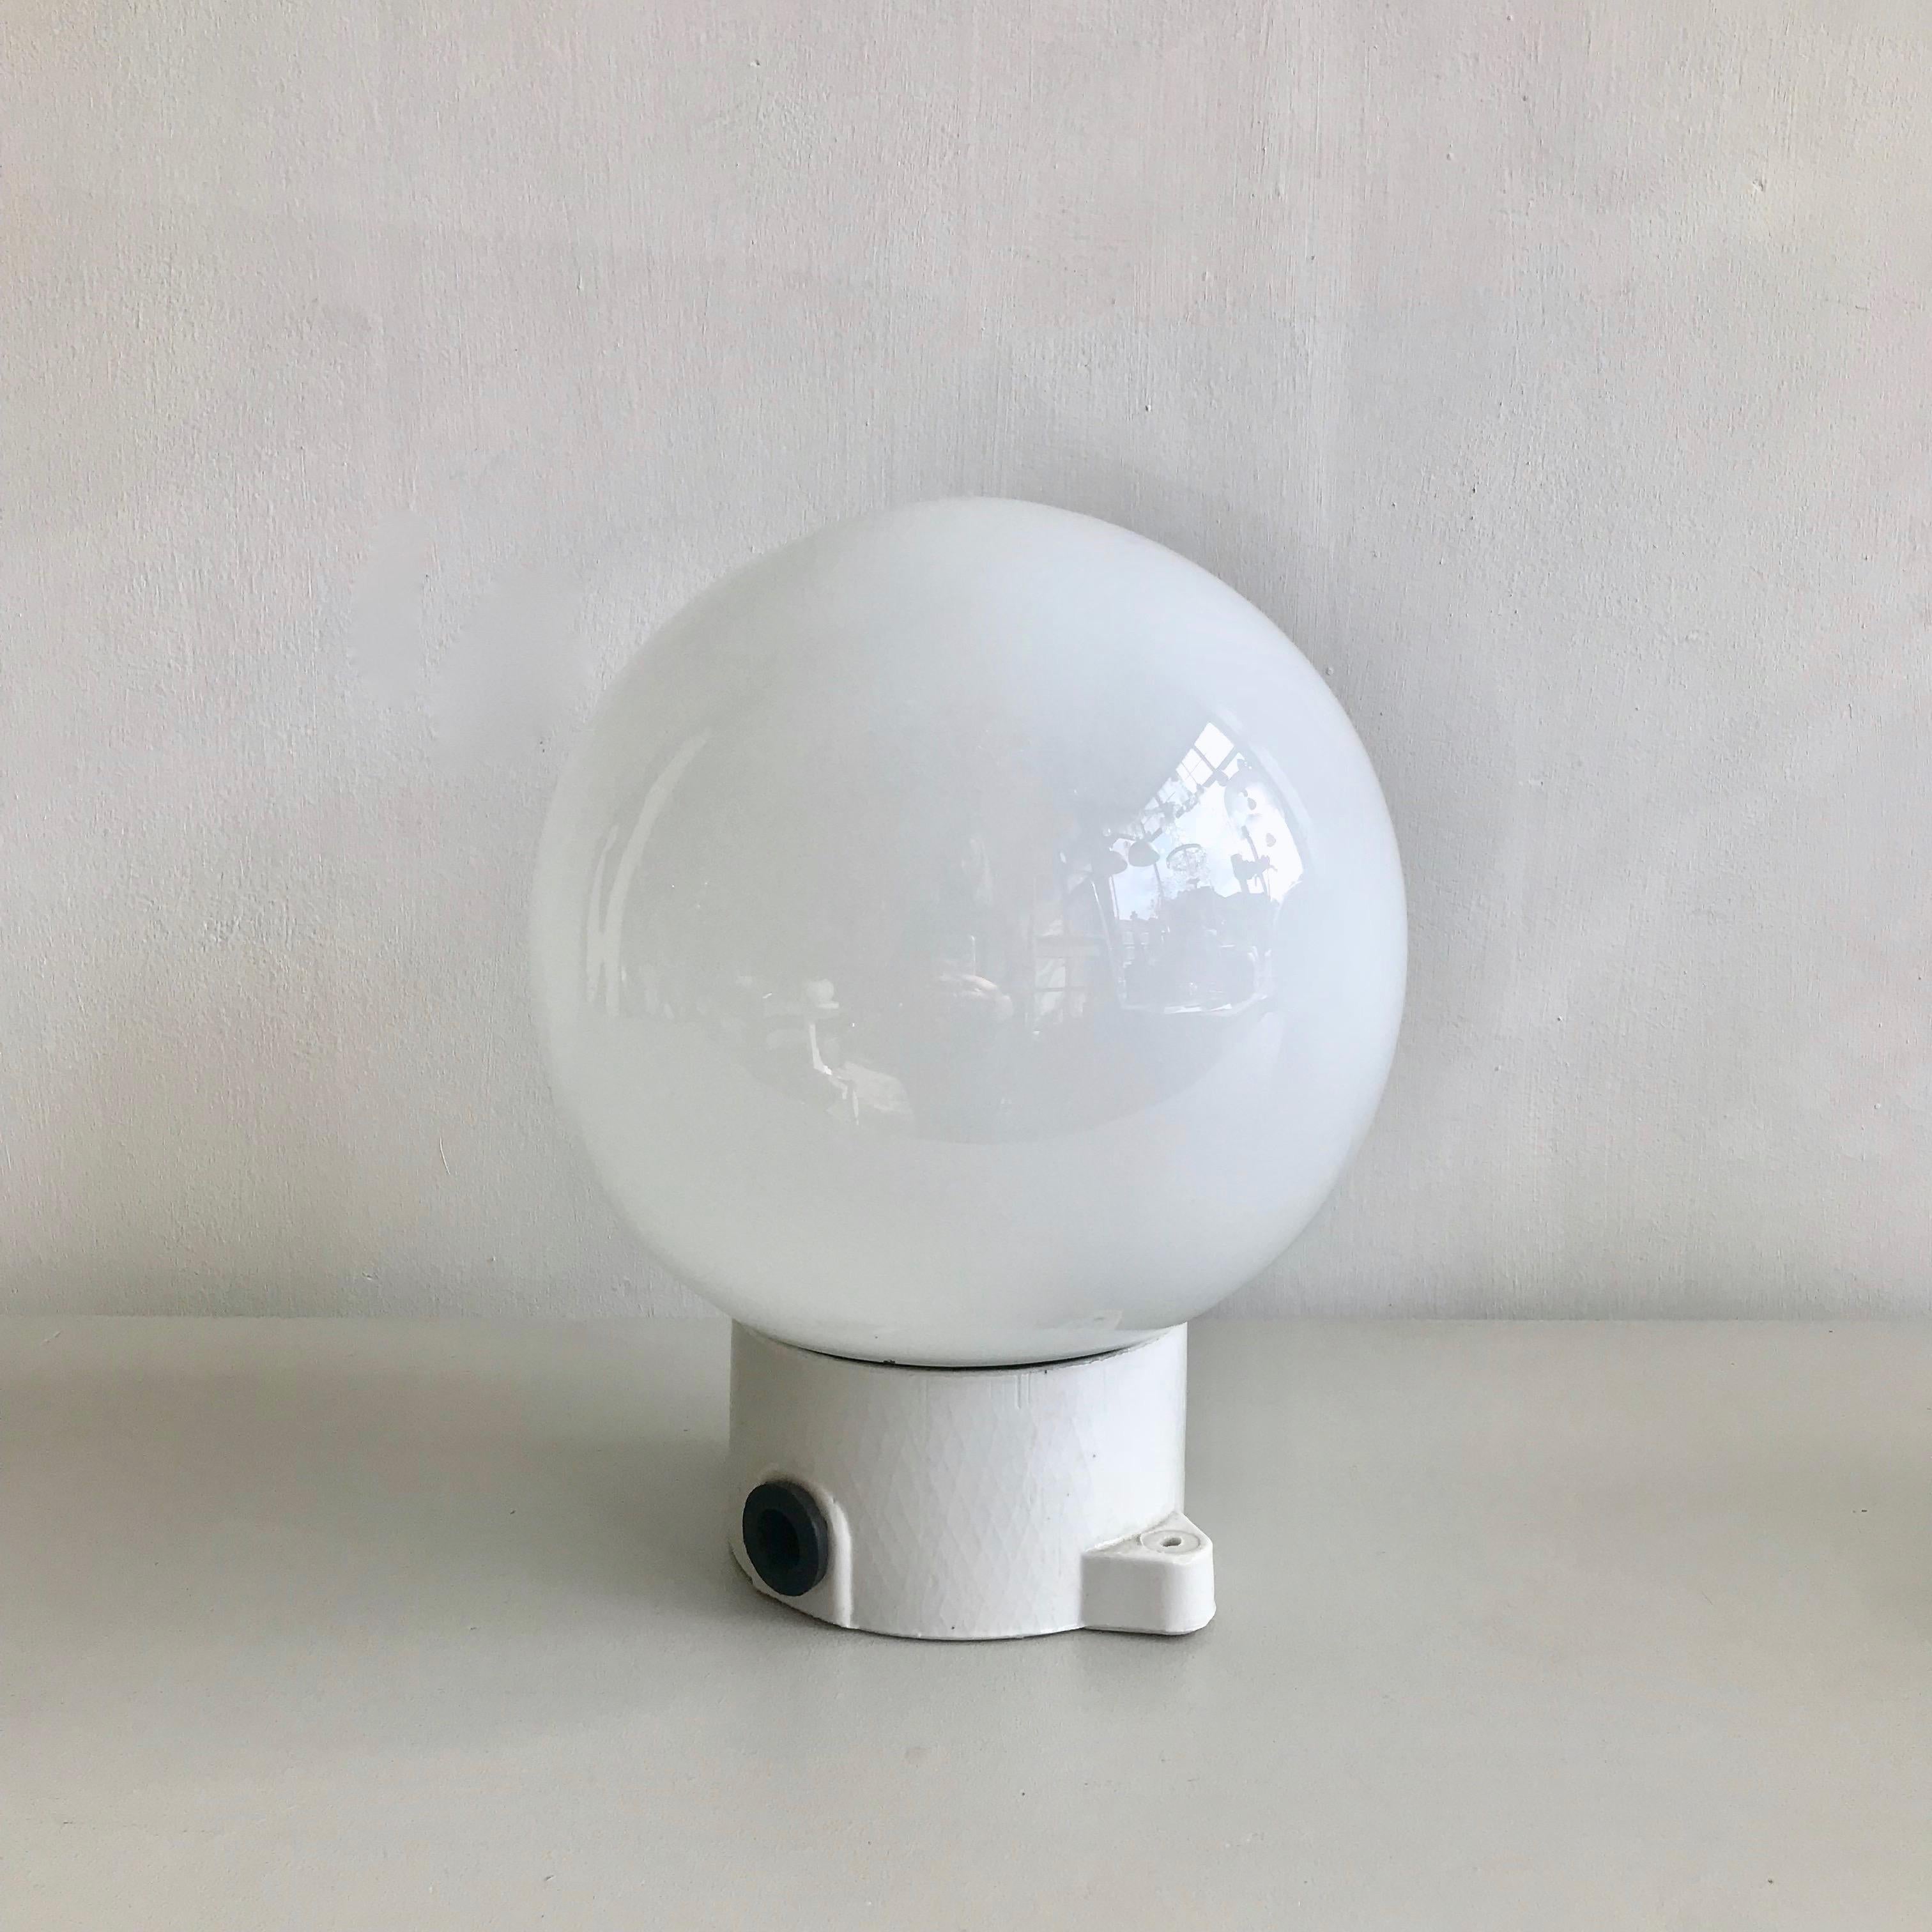 Five ceramic and opaline lights. Suitable for wall lights or ceiling mounted. Original industrial lights in excellent condition. The pendants are rewired and in working order. The glass shade screws into the ceramic fitting.